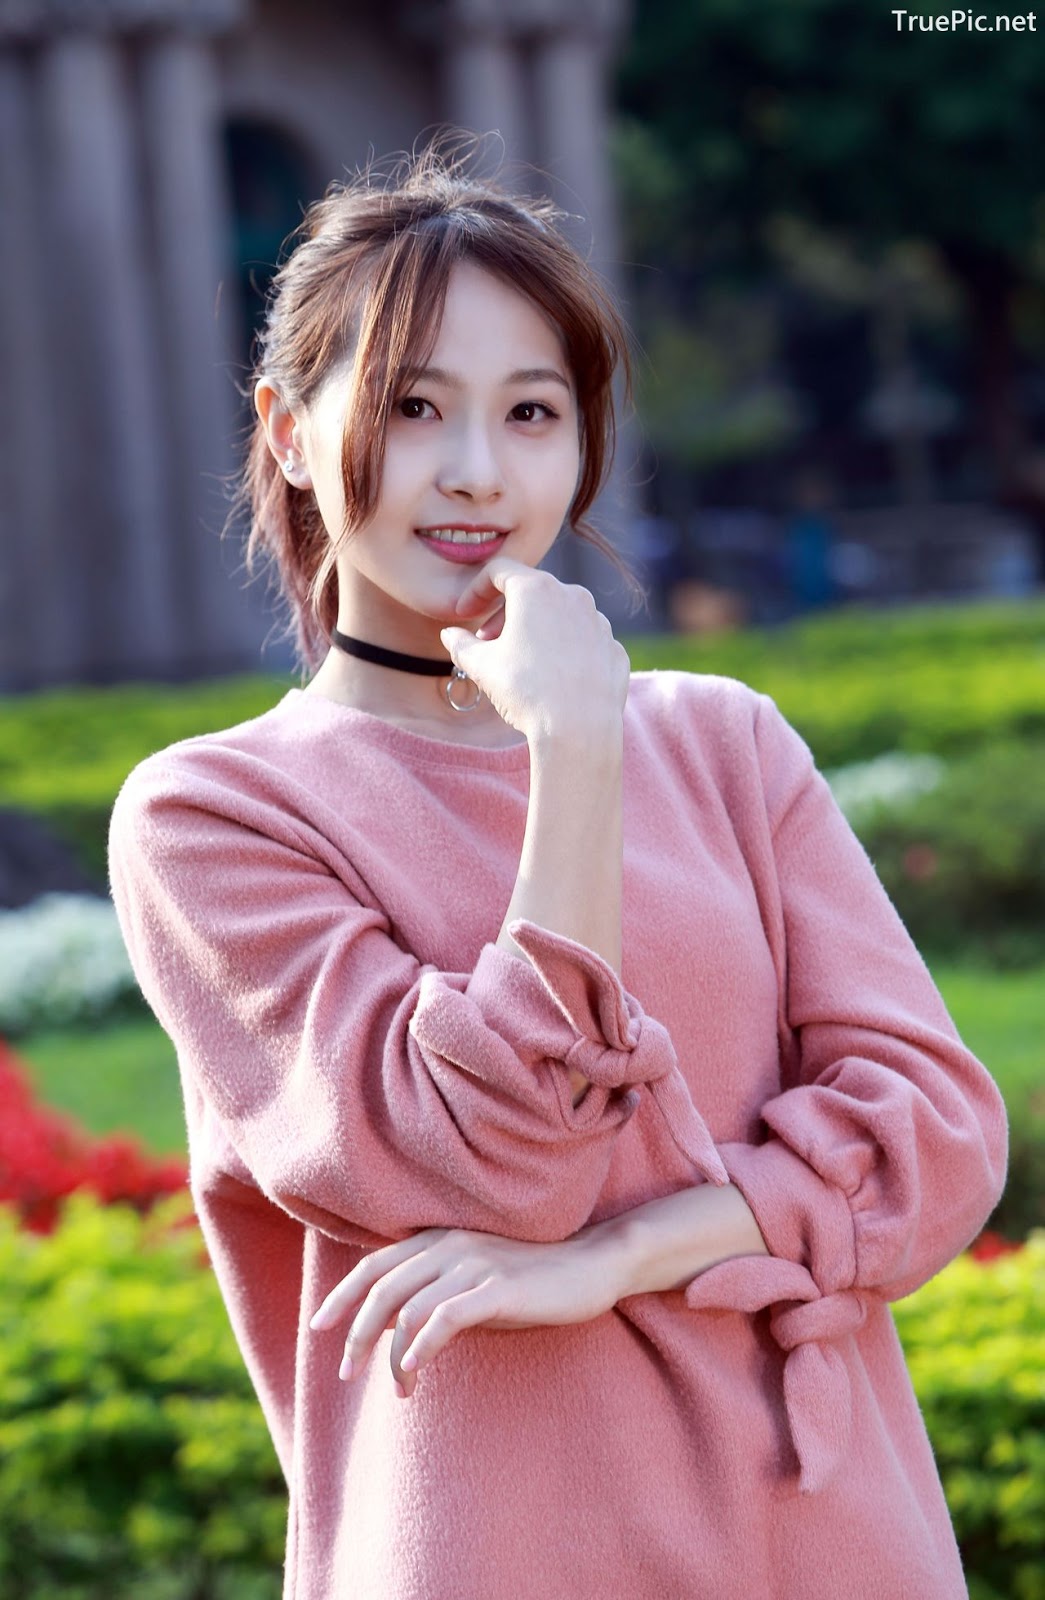 Image-Taiwanese-Model-郭思敏-Pure-And-Gorgeous-Girl-In-Pink-Sweater-Dress-TruePic.net- Picture-14